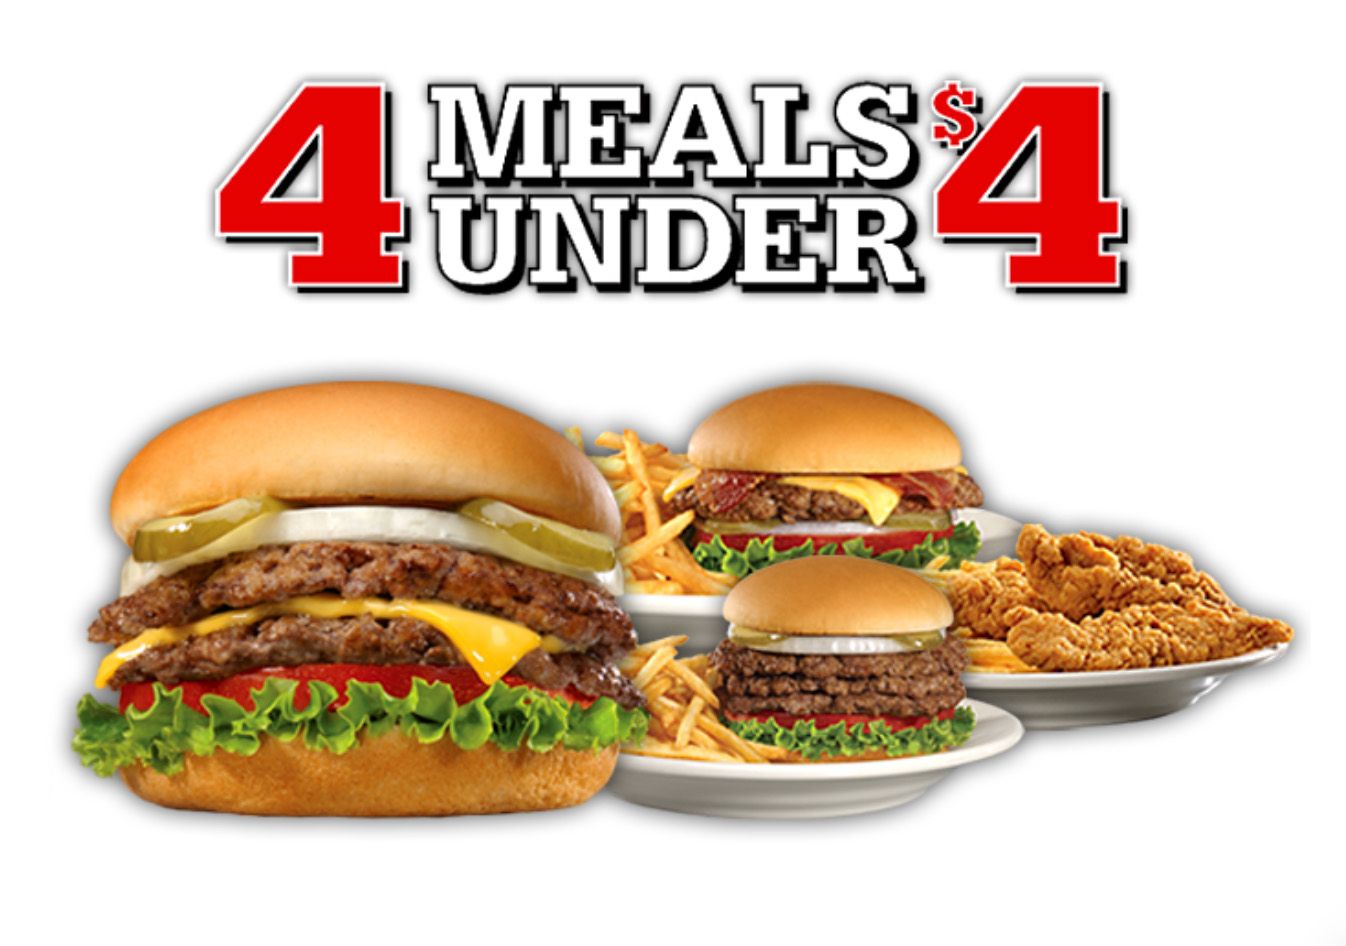 Save Big with 4 Meals Under 4 at Steak 'n Shake for a Limited Time Only